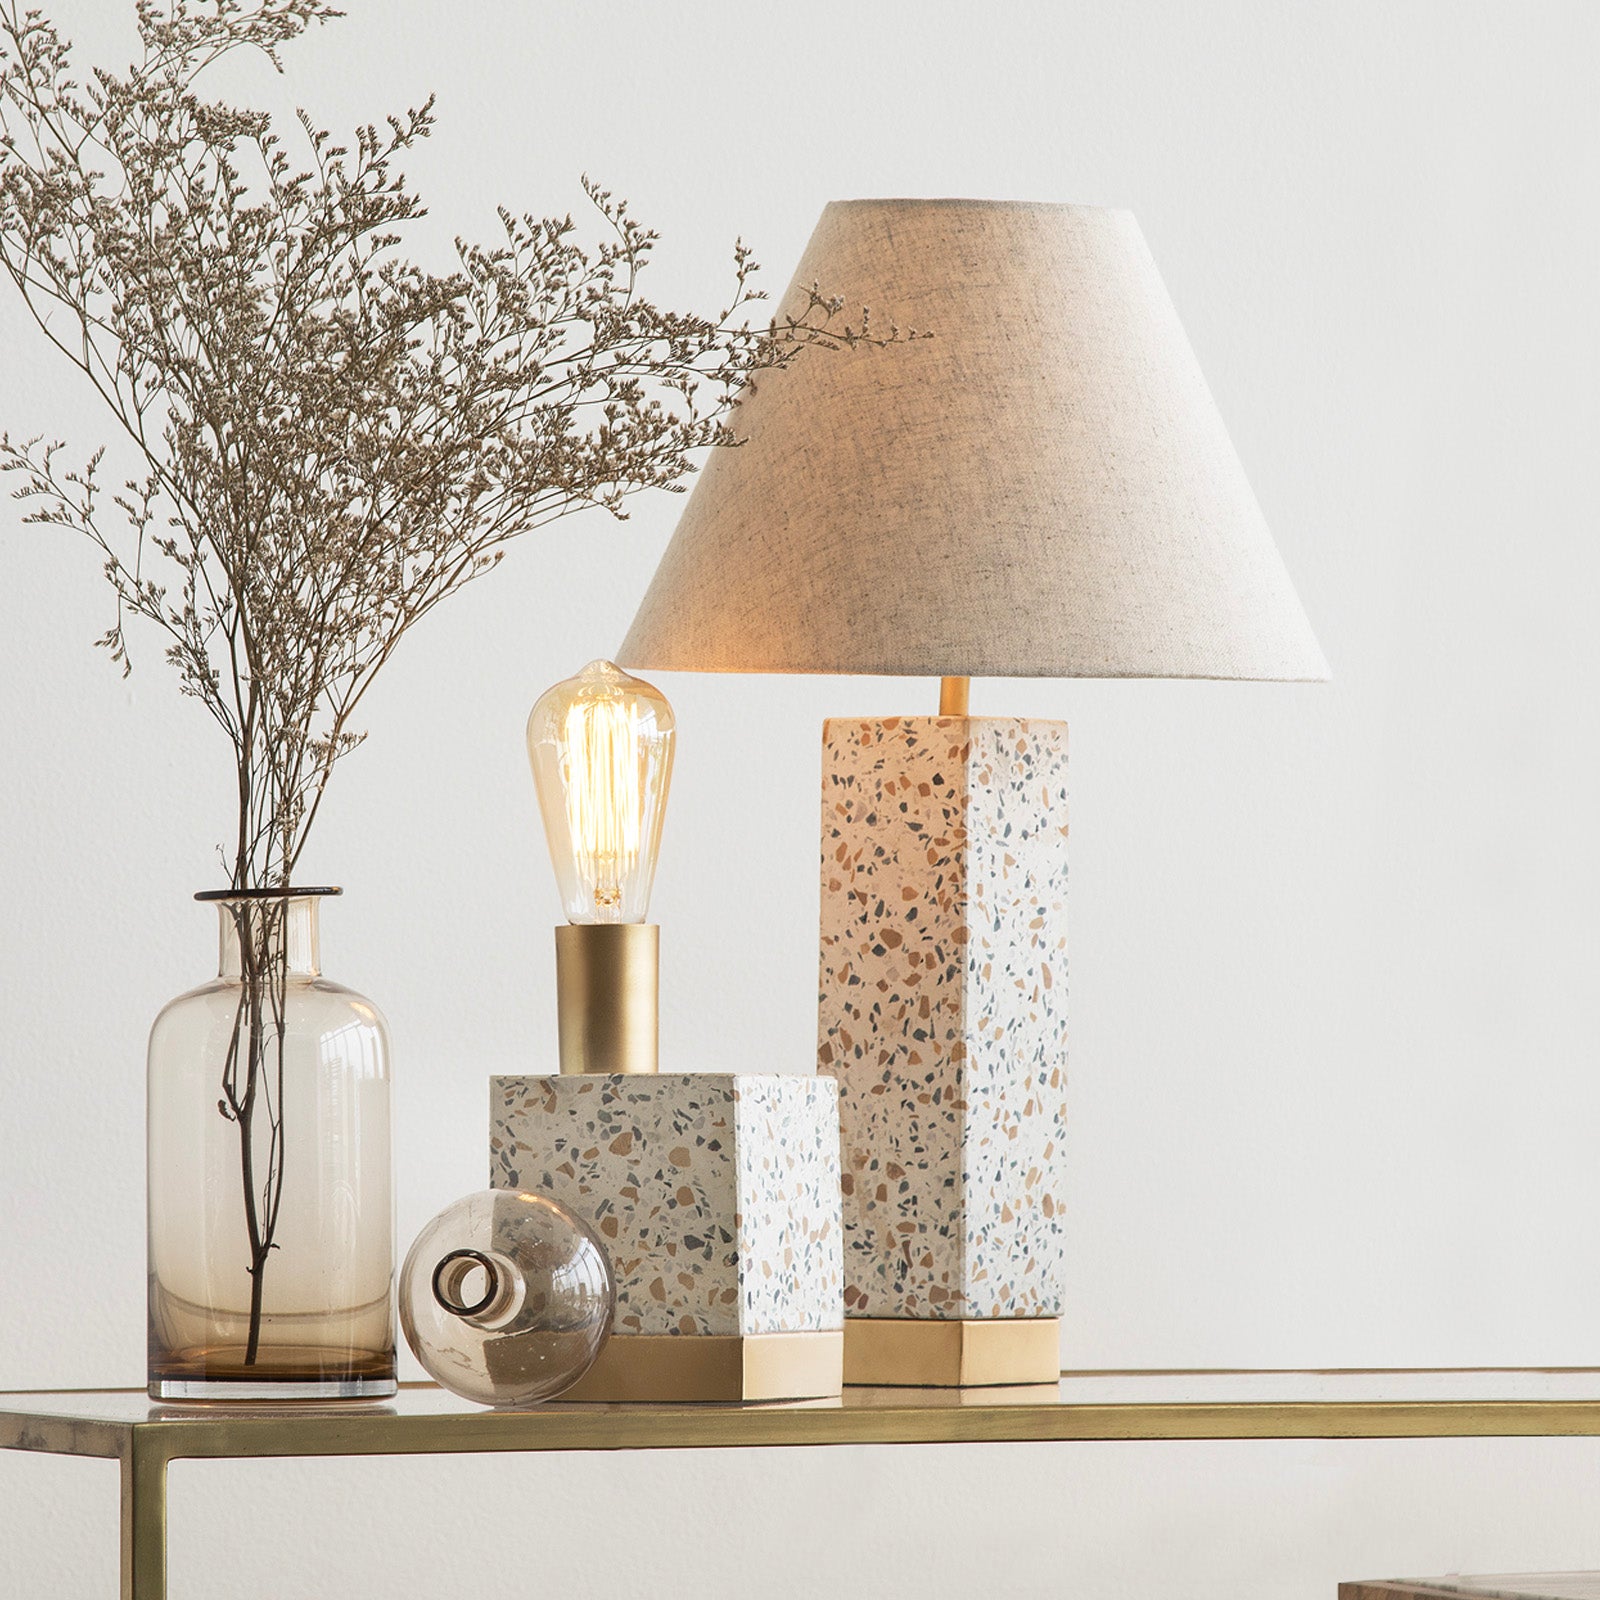 Speckle Table Lamp With Conical Shade